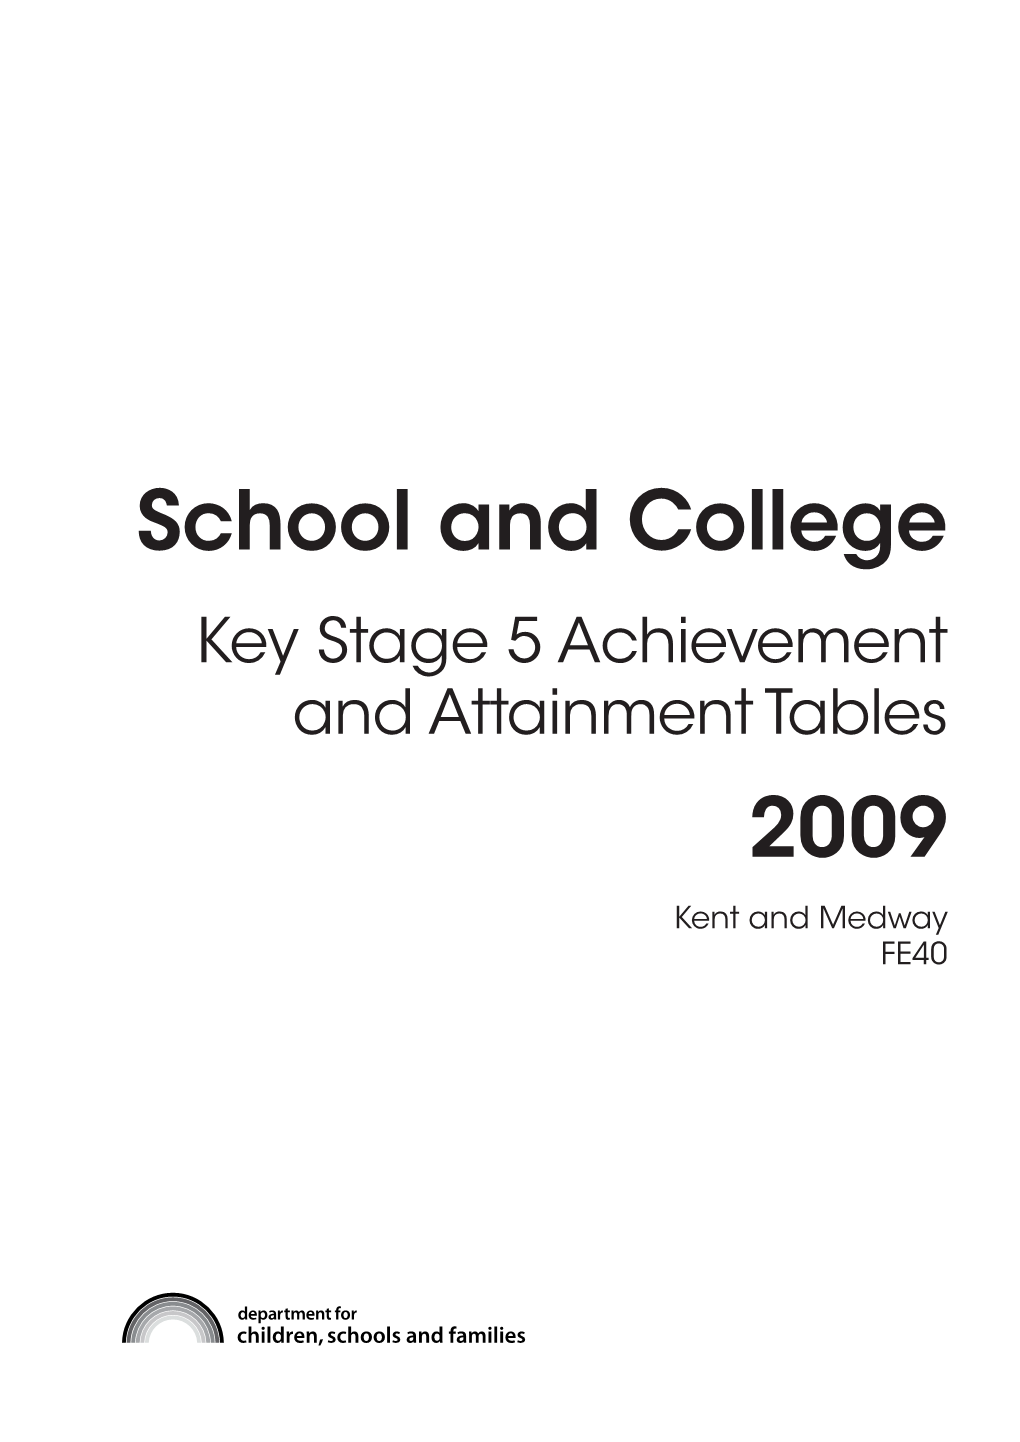 School and College 2009